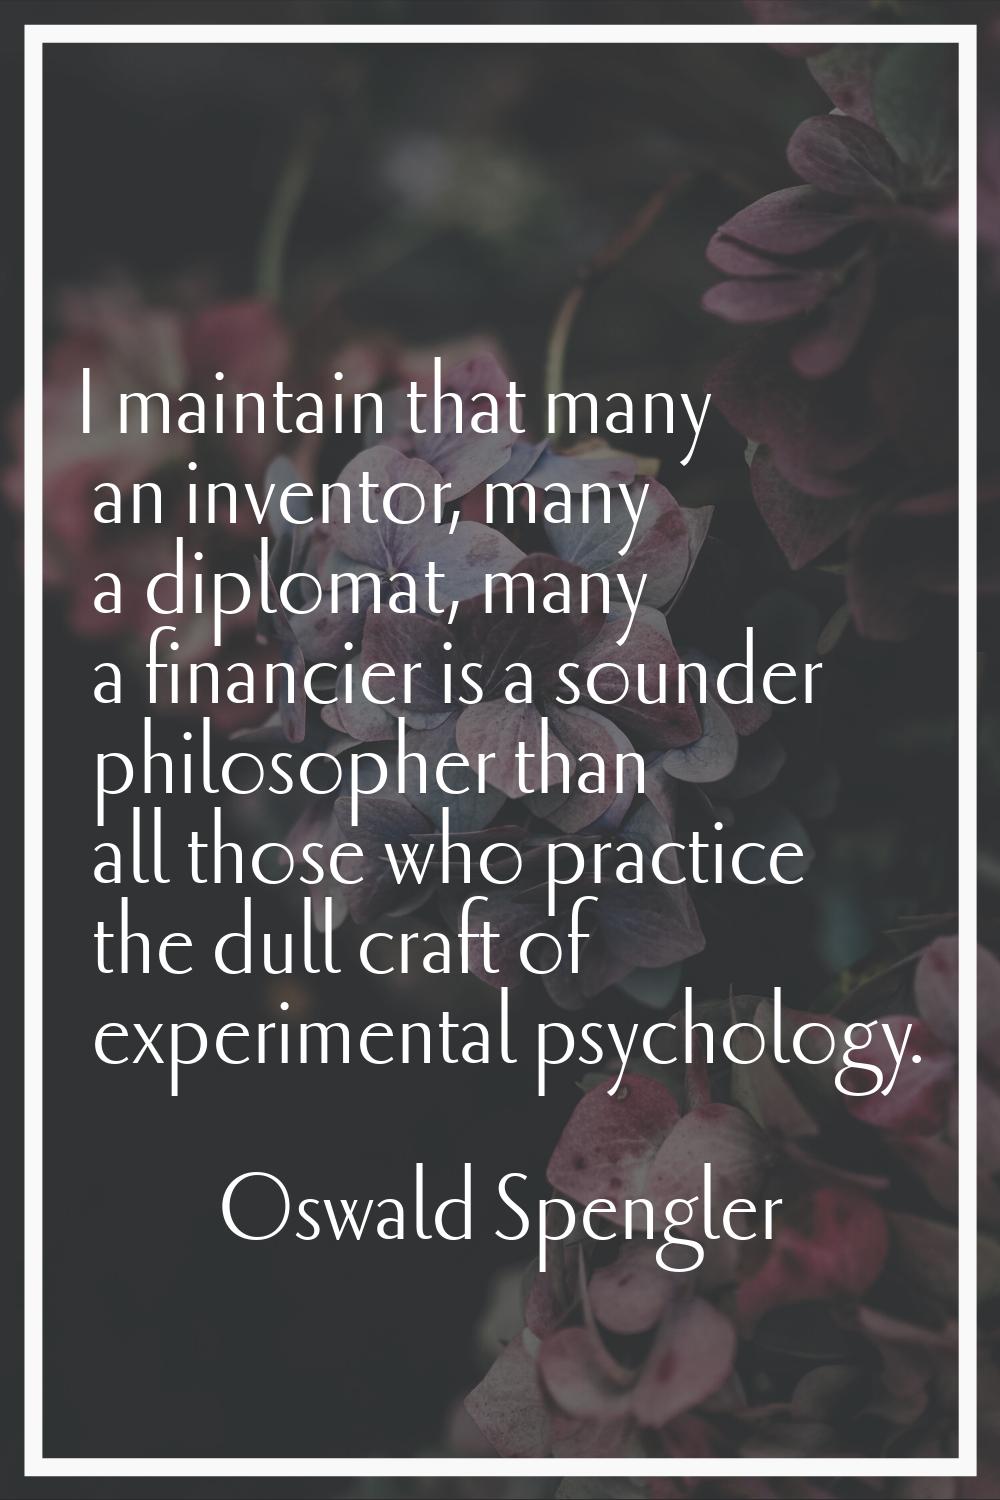 I maintain that many an inventor, many a diplomat, many a financier is a sounder philosopher than a